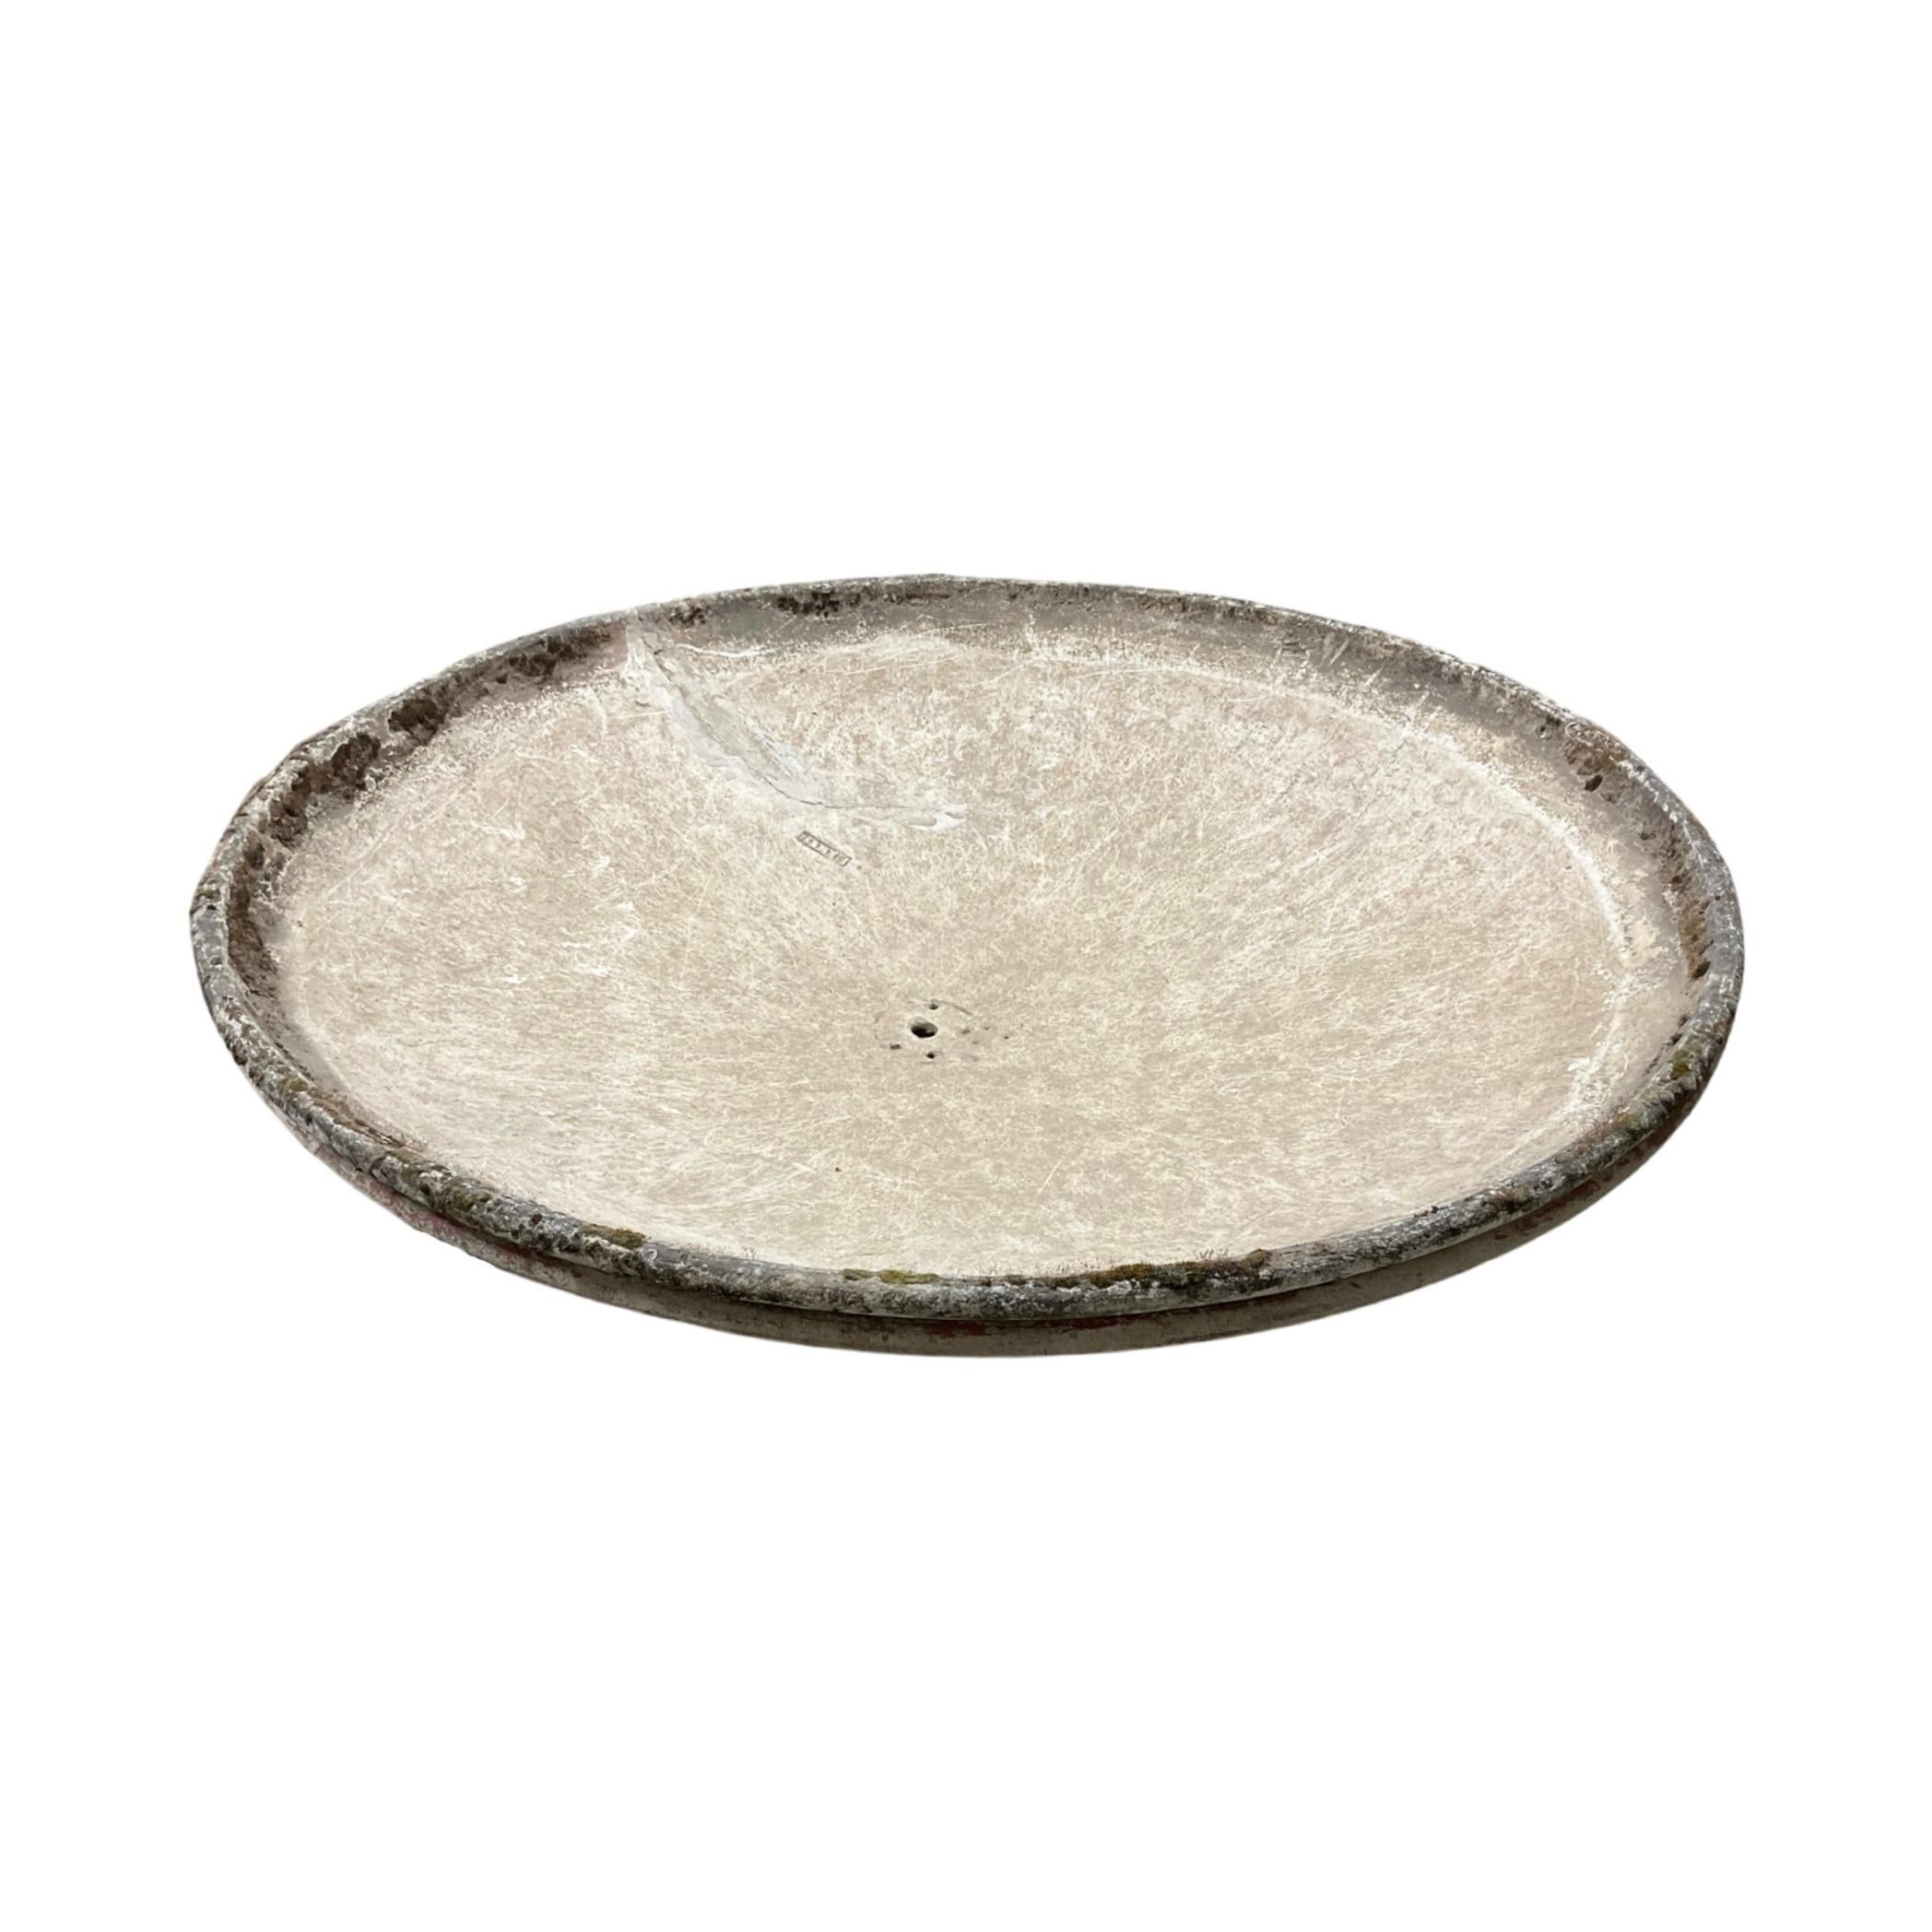 This Swiss saucer planter by Willy Guhl is a 19th century design made from a durable limestone composite. The planter includes a custom tri stand, offering an elegant display for flowers or plants. Bring Swiss design history to your outdoor space